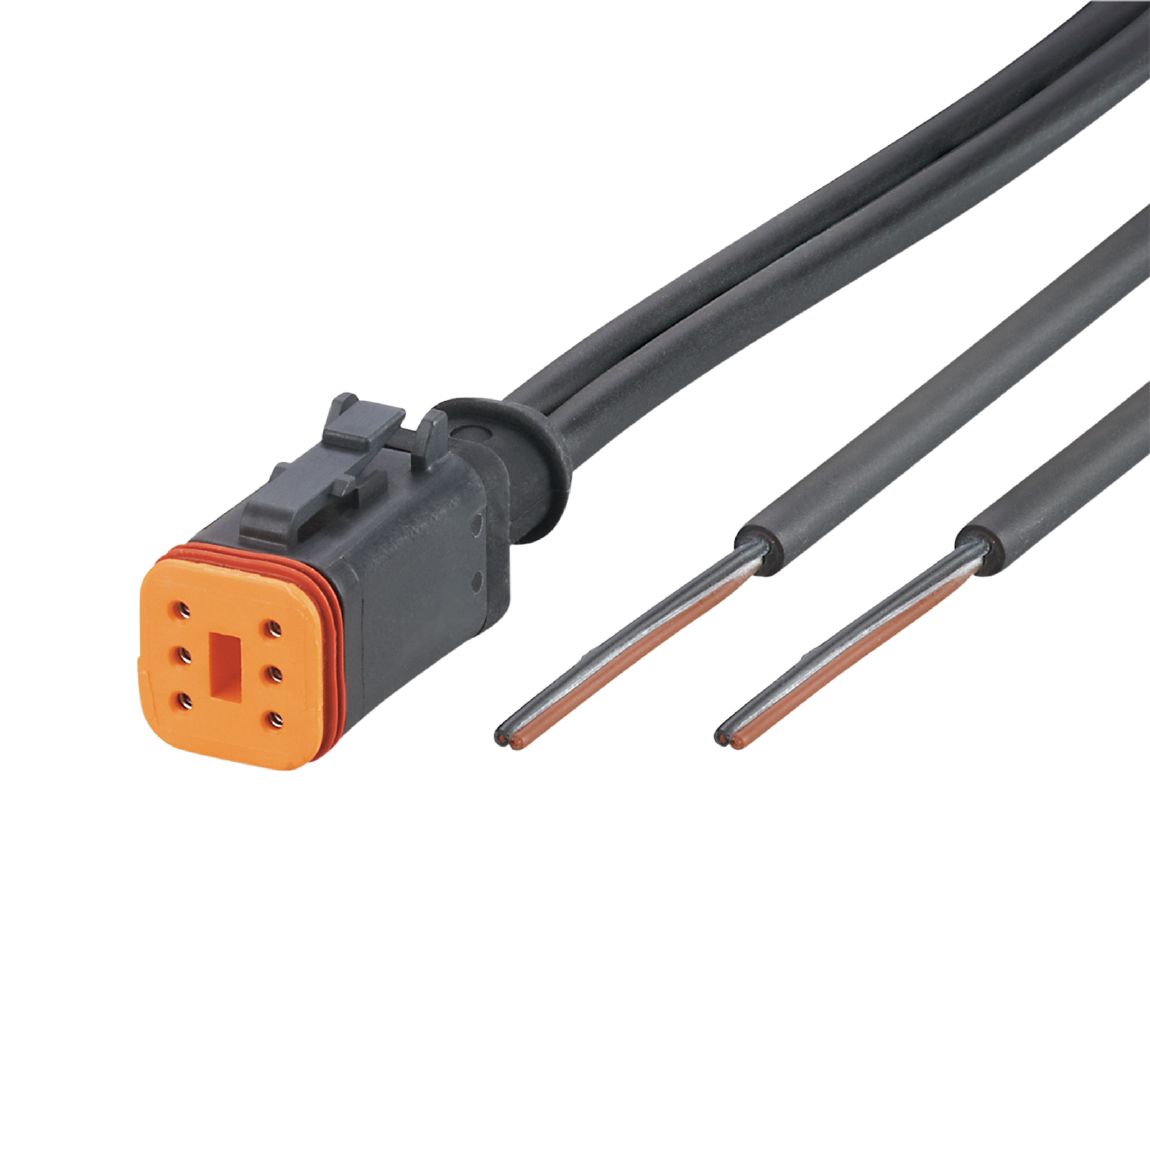 E12553 - Y connection cable - ifm